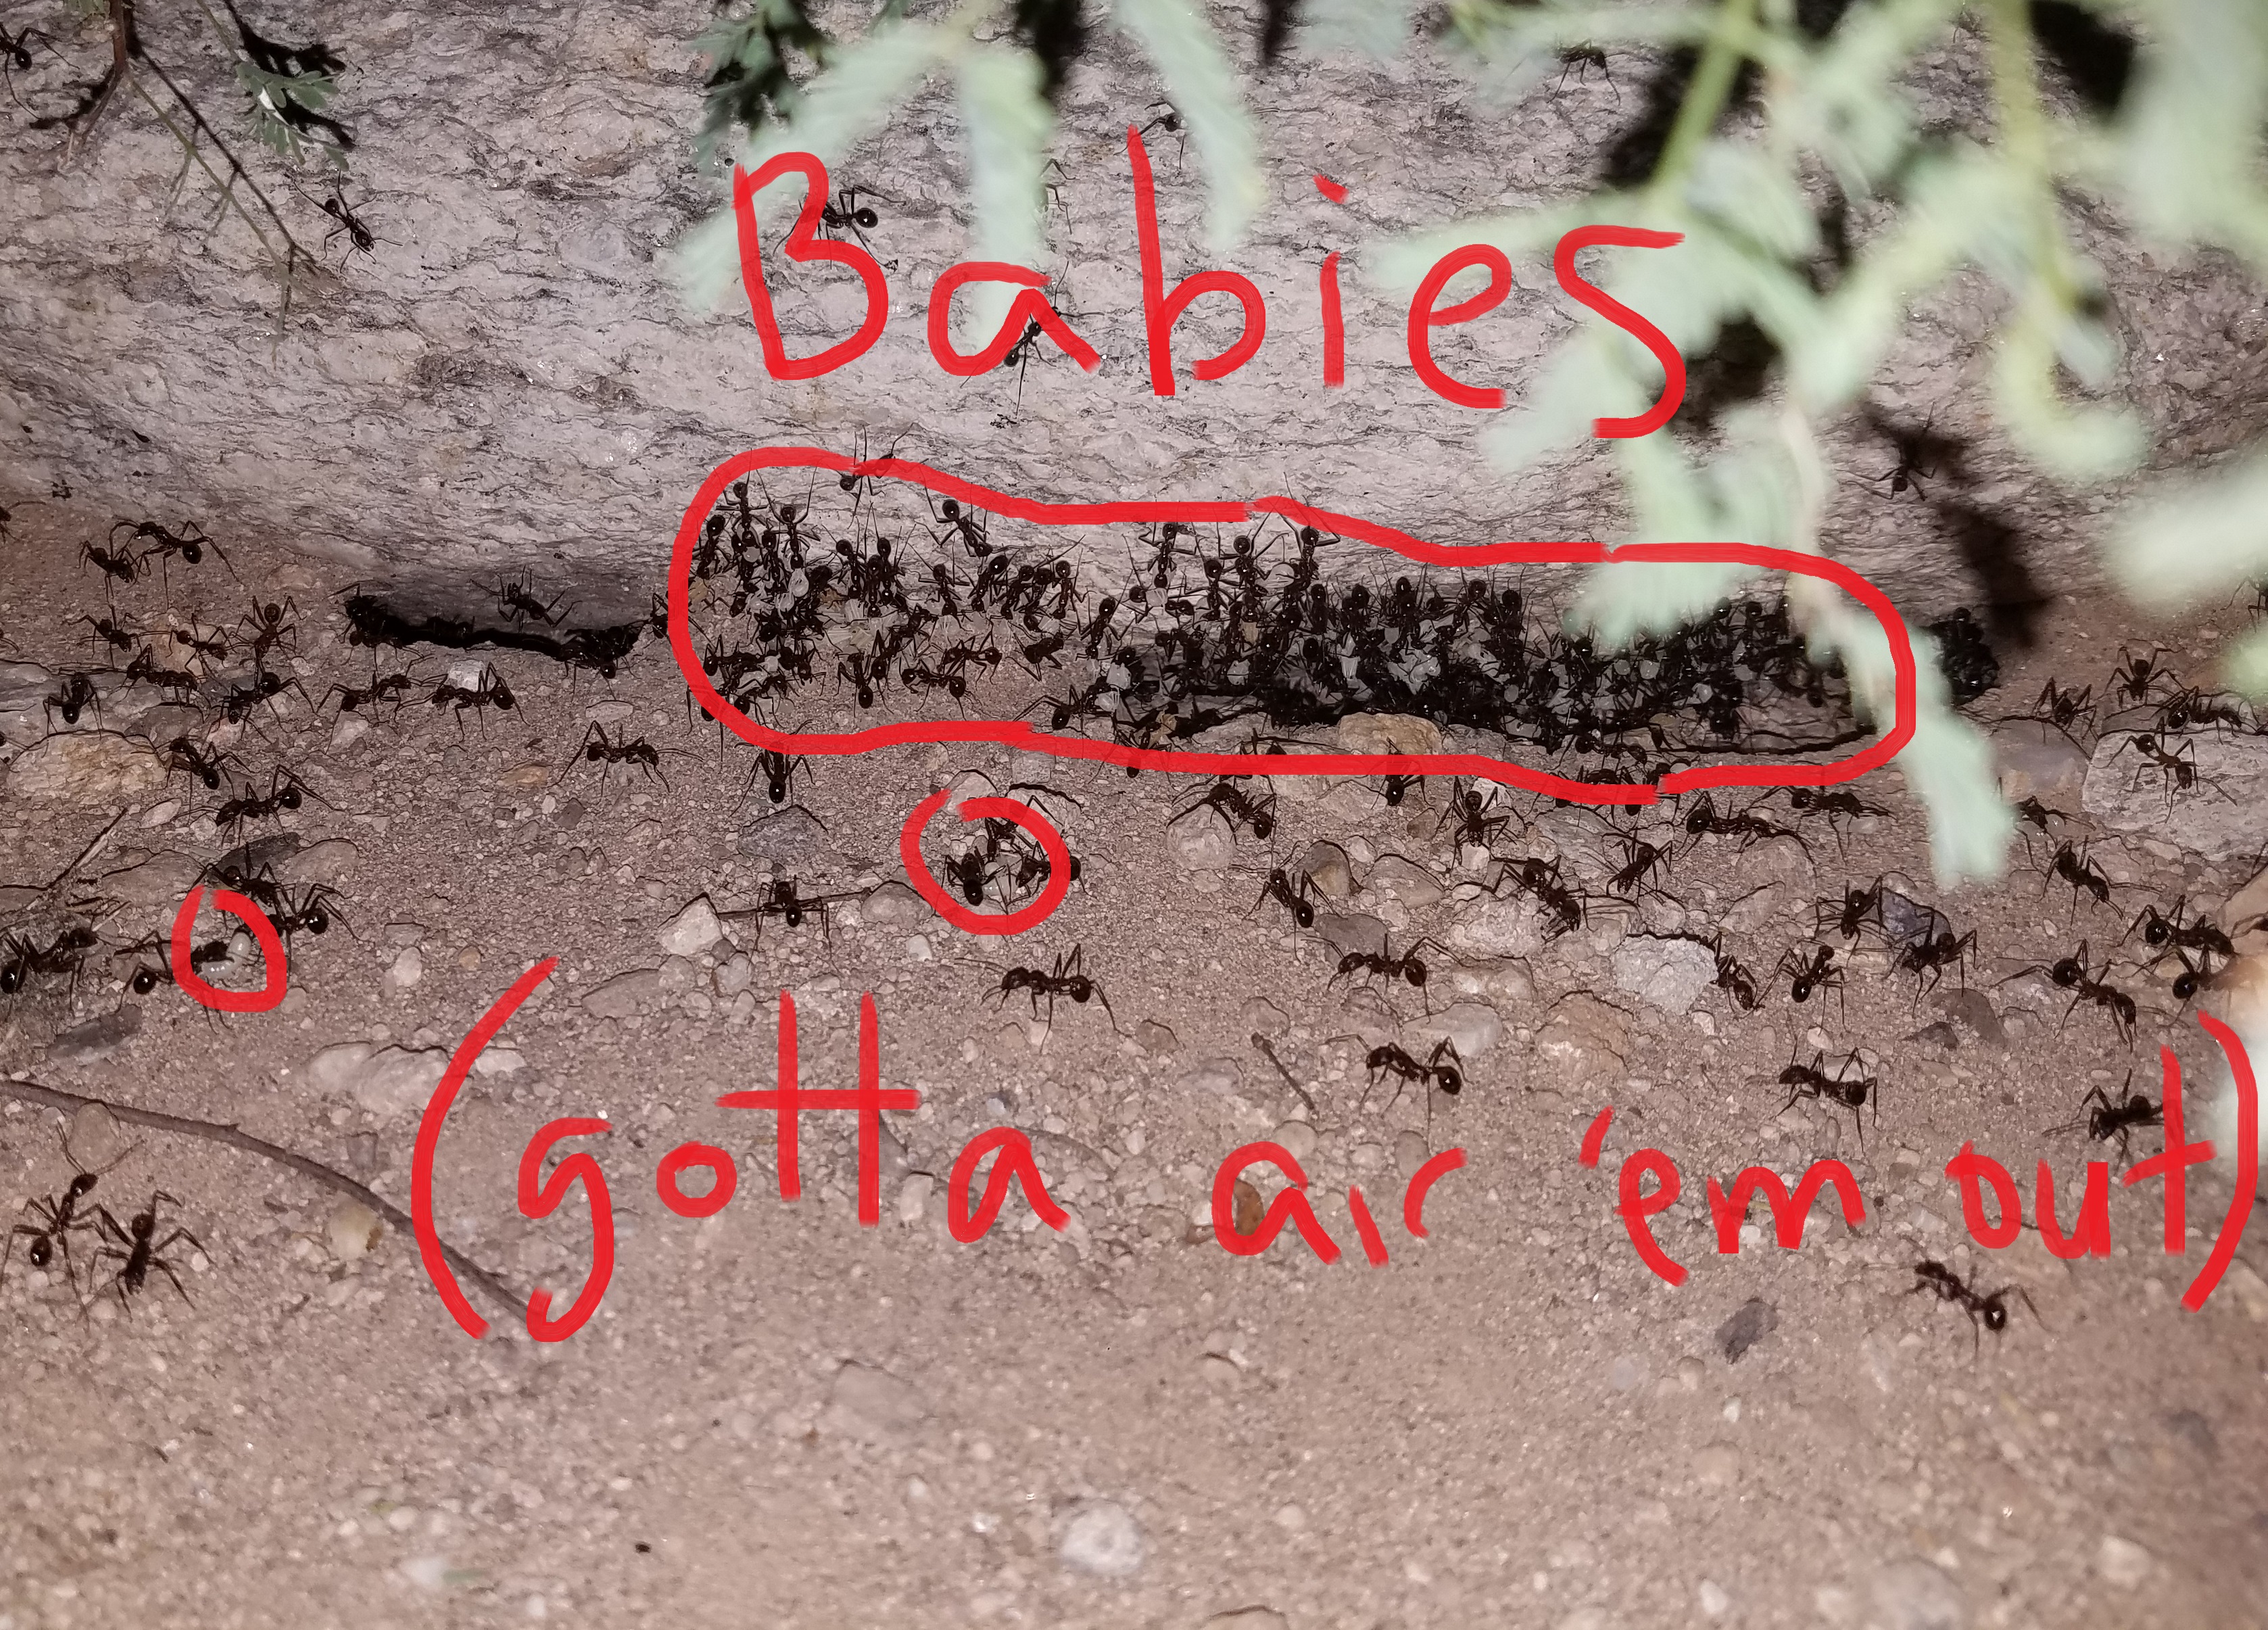 tucson harvester ants close up view